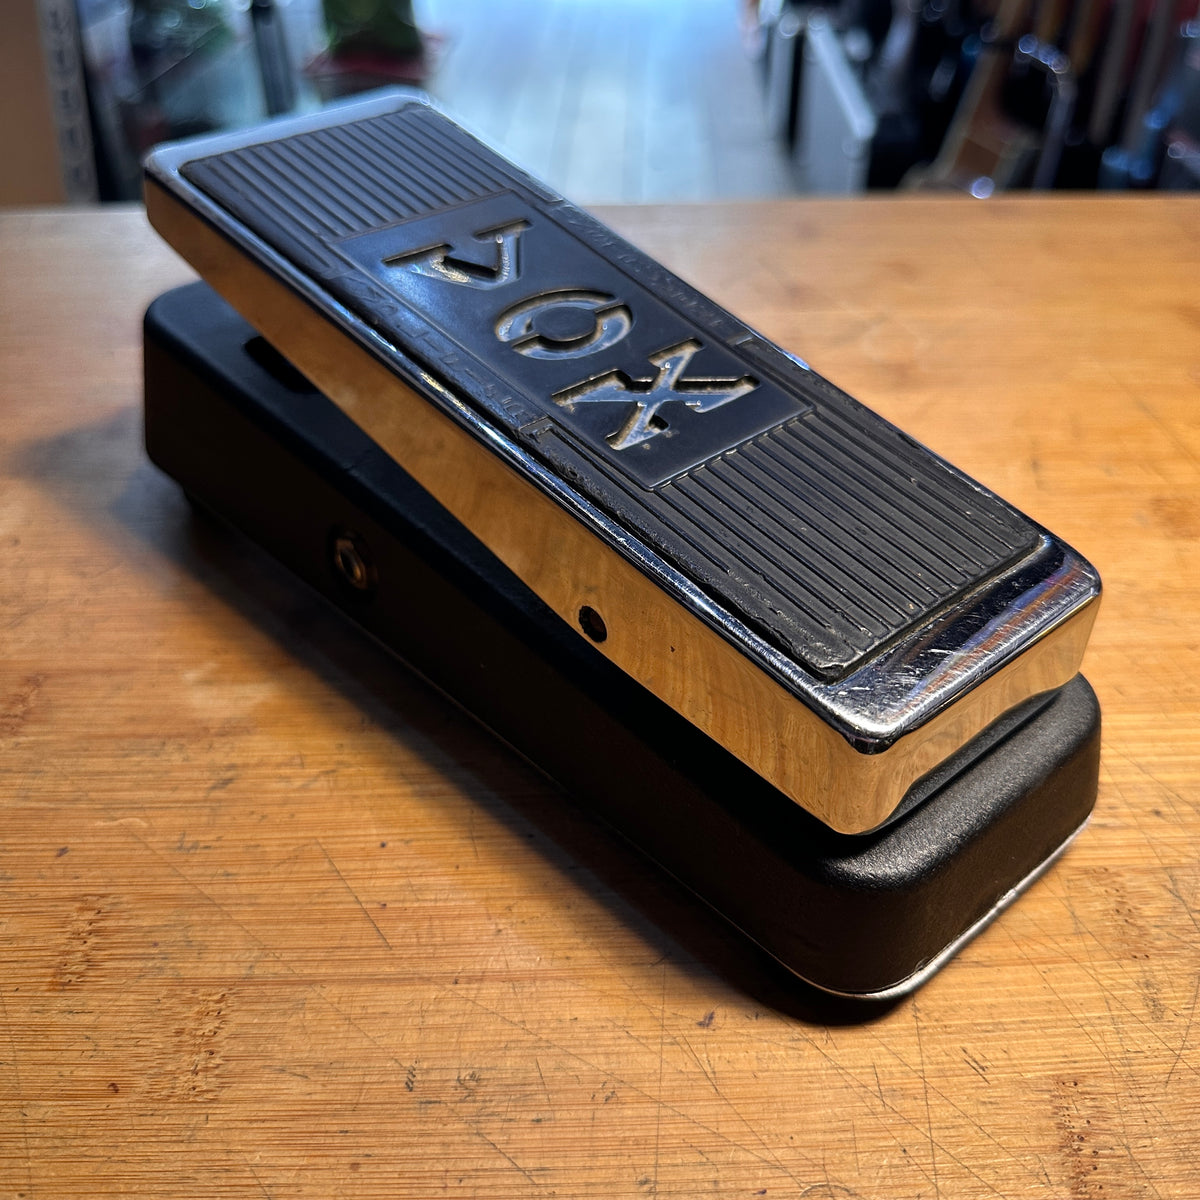 Vox V847 Wah Pedal - Made in USA - Preowned